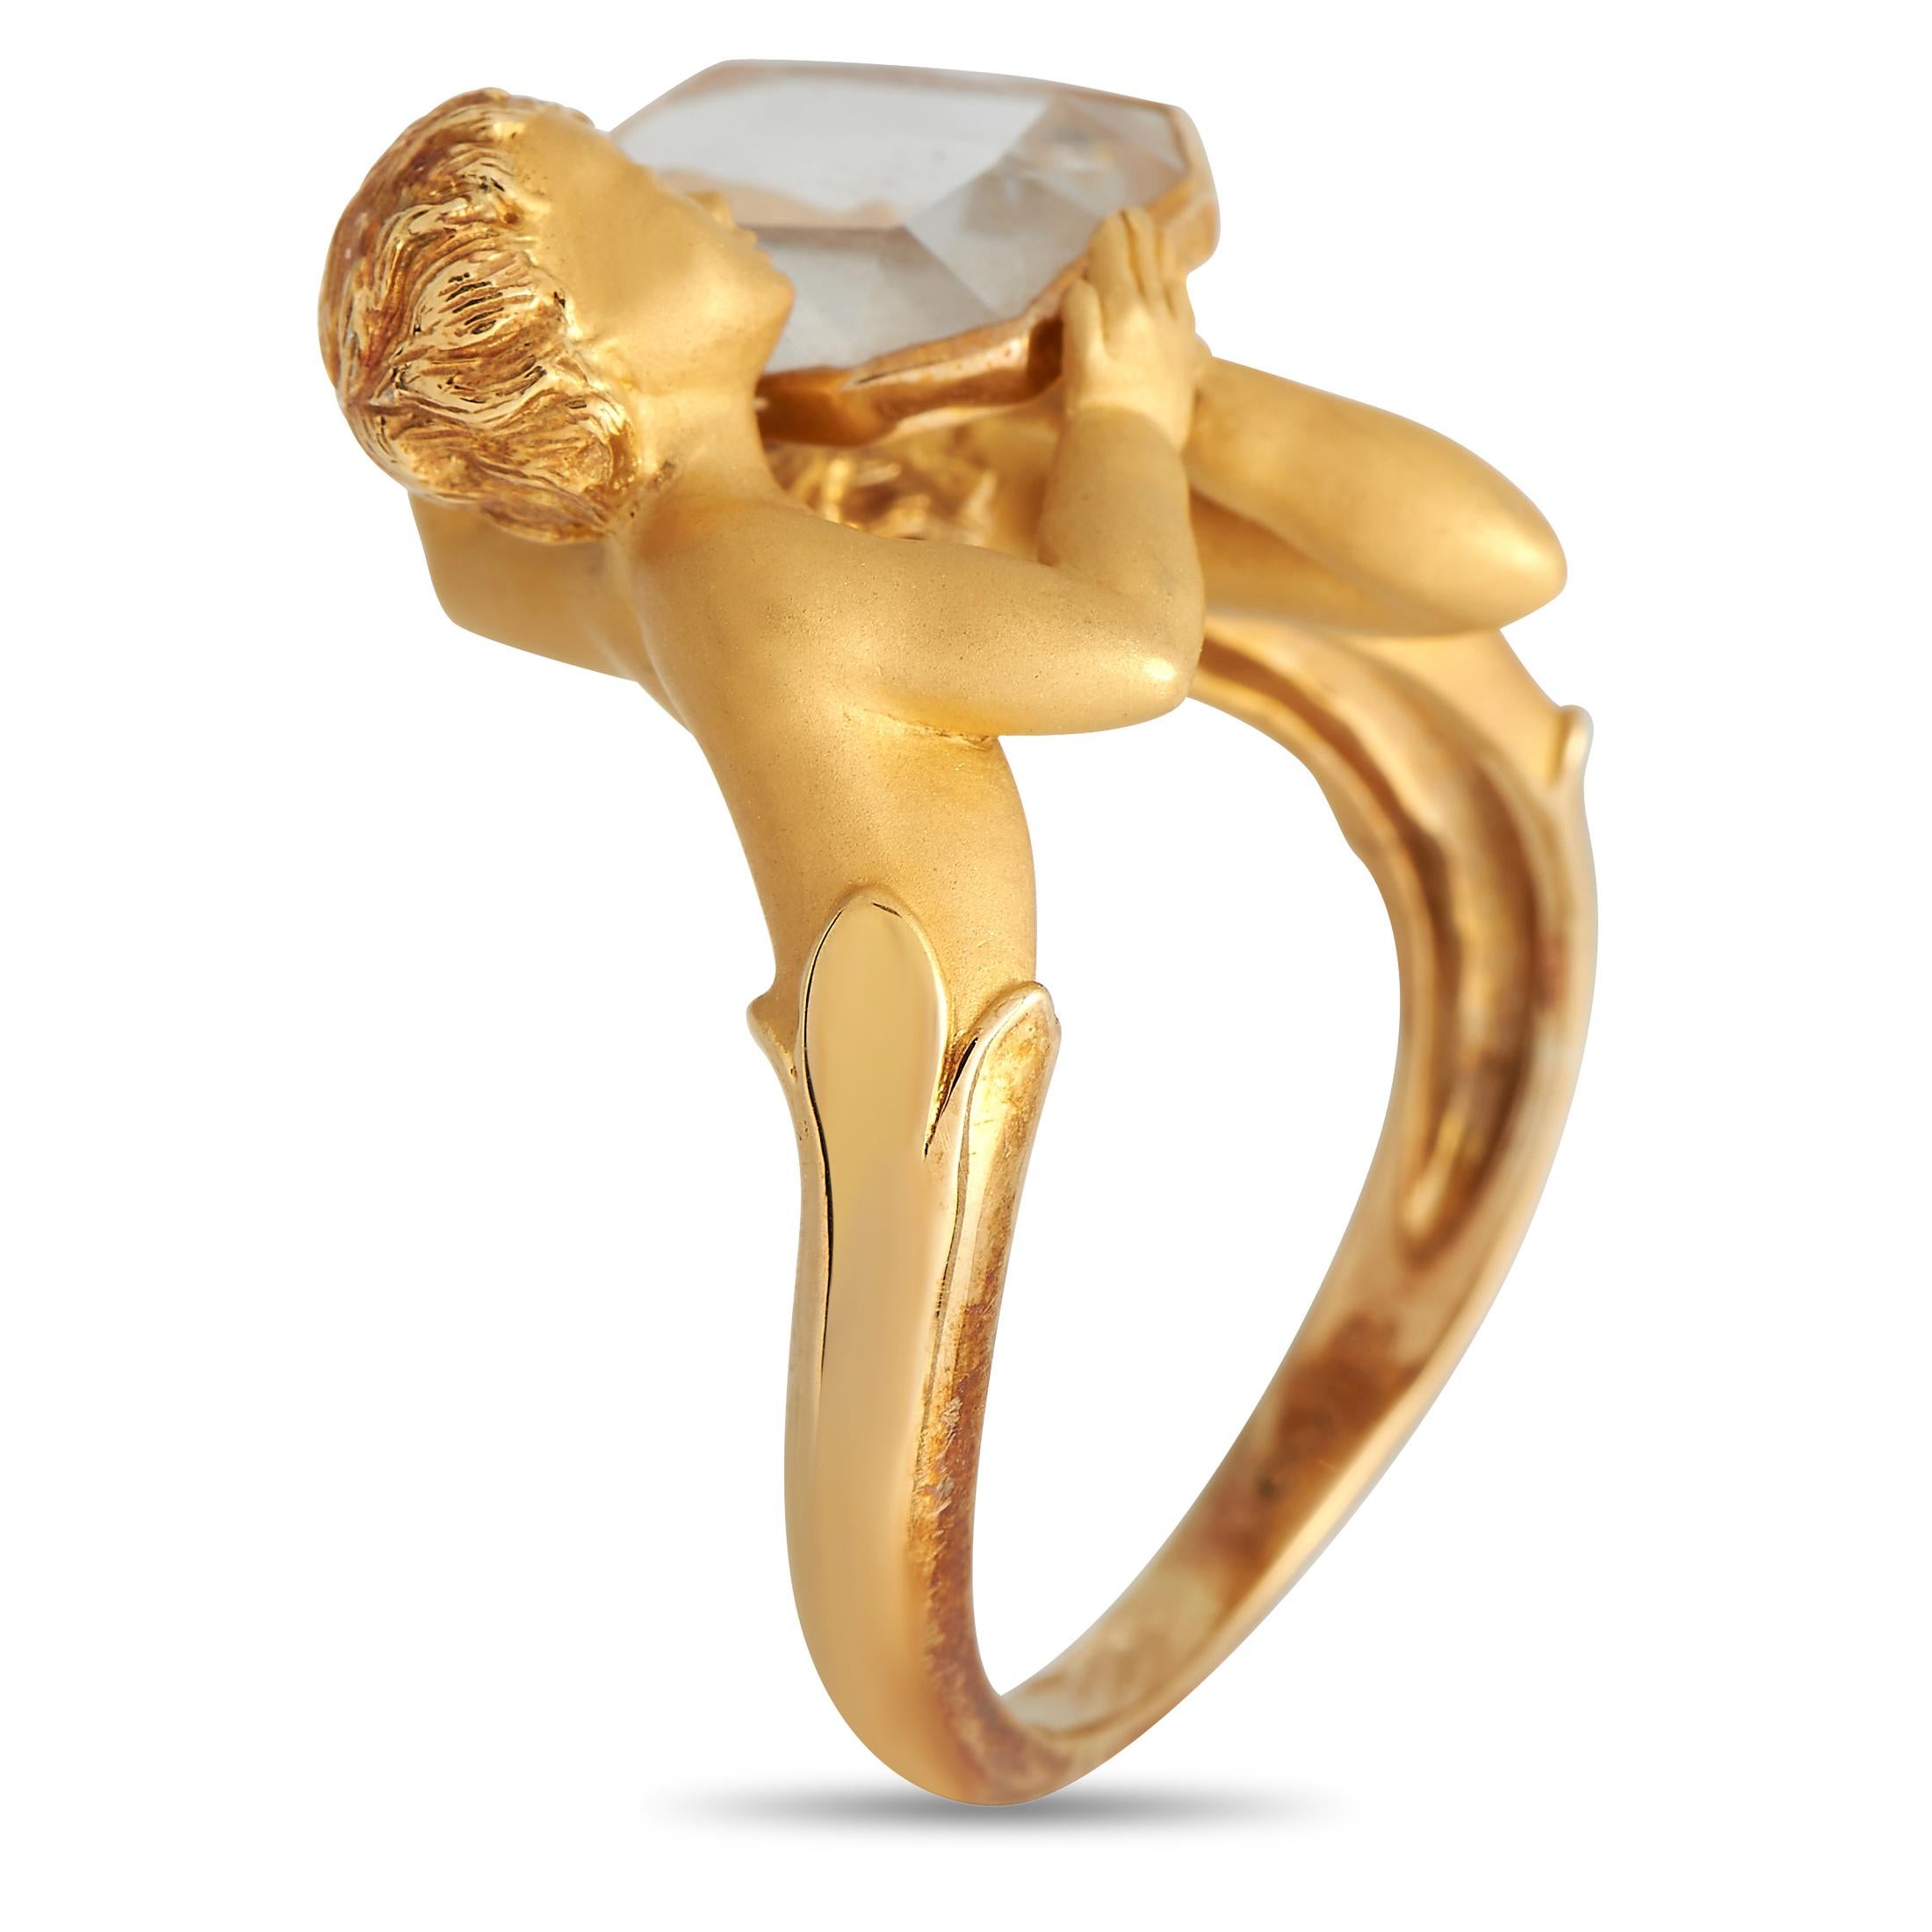 From Spanish jewelry house Carrera y Carrera, here is a wearable work of art that's sure to bring character to your style. This sculptural statement ring in matte yellow gold features a bypass-style shank with tulip-style shoulders. Also present are